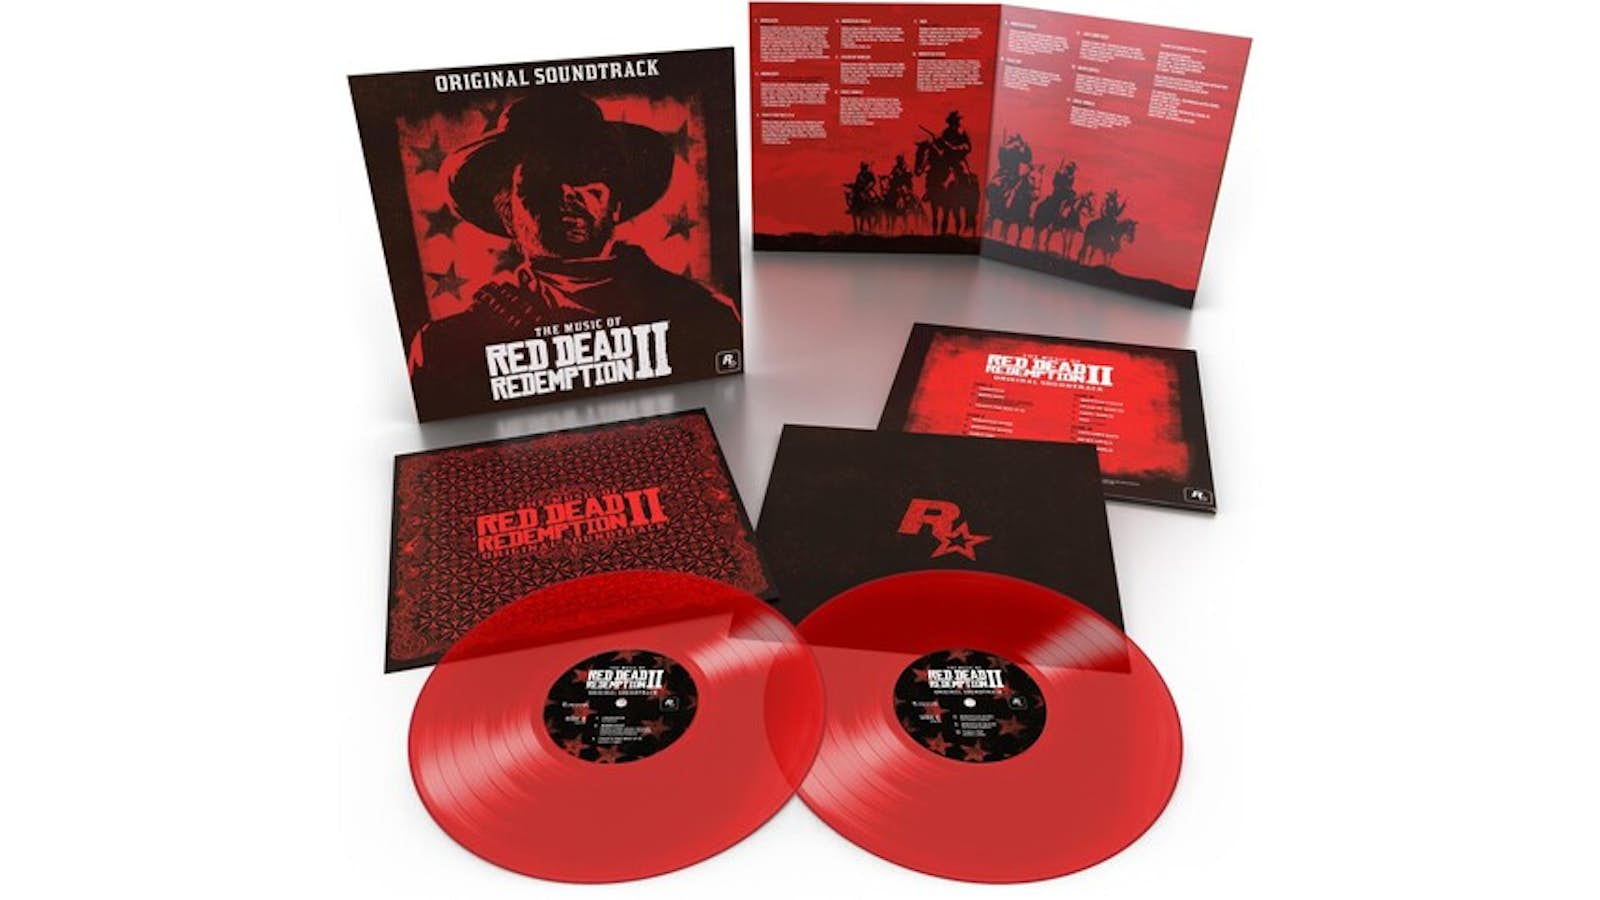 Of Red Dead Redemption 2 / O.S.T. Music Of Red Dead Redemption 2 / Original Soundtrack (2LP) Vinyl Record